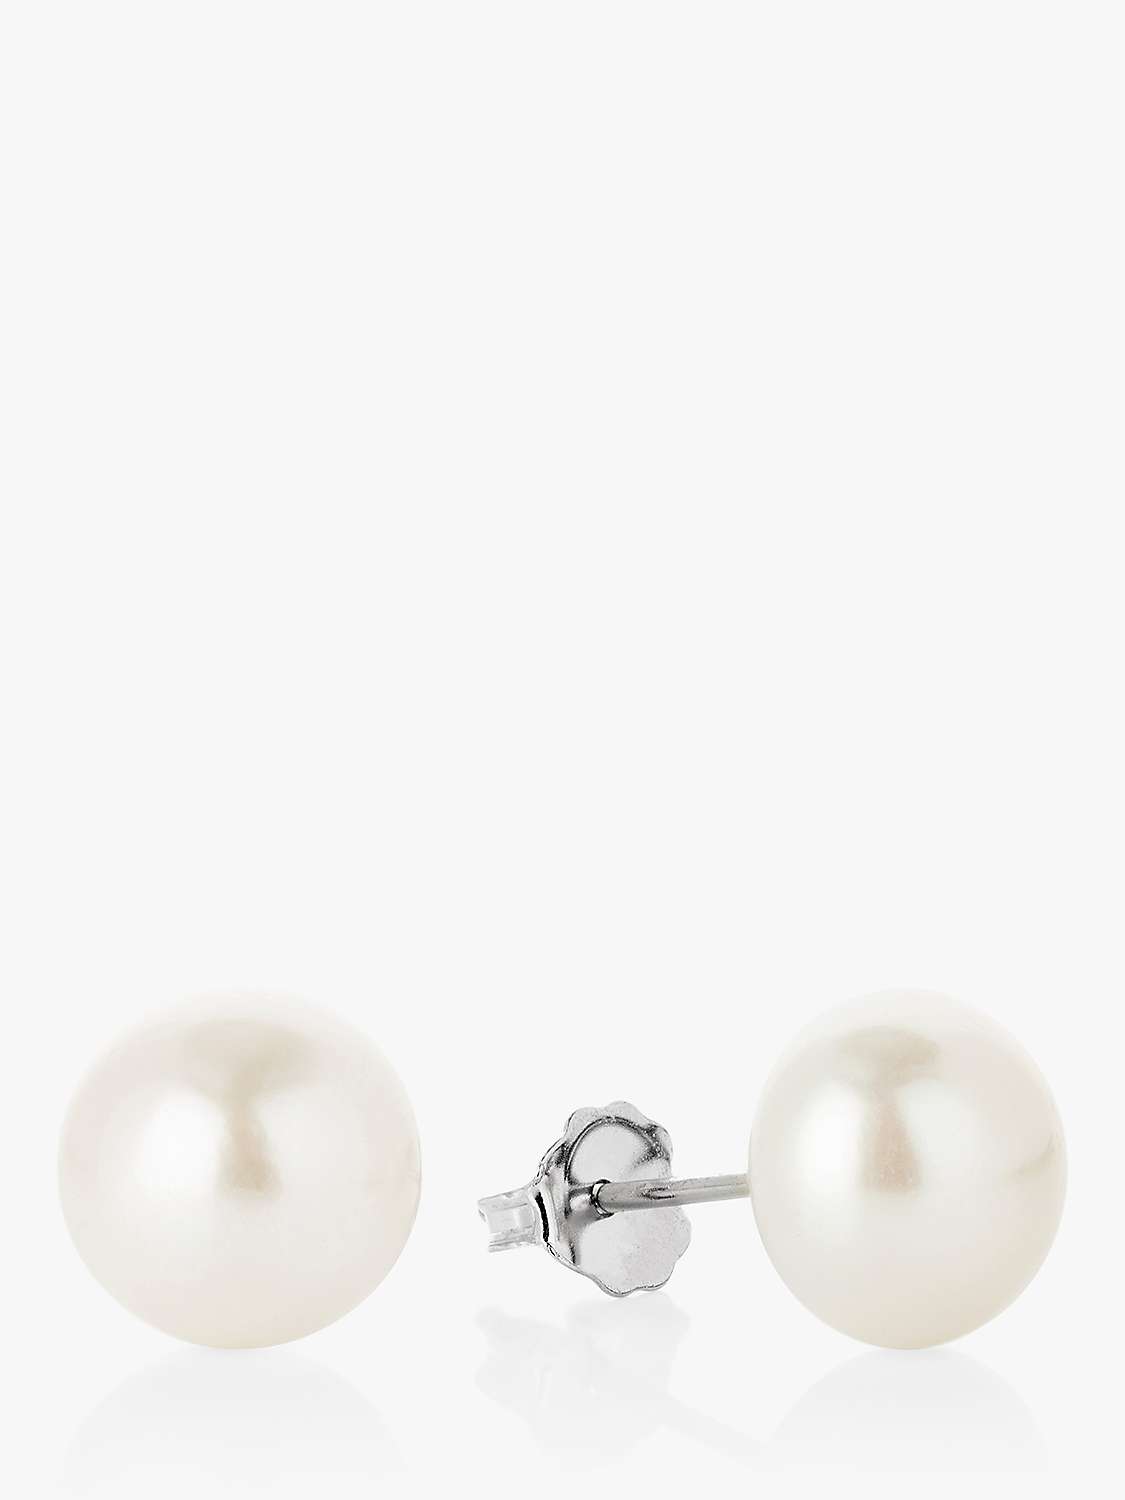 Buy Claudia Bradby Freshwater Pearl Button Stud Earrings, 9-10mm, White Online at johnlewis.com